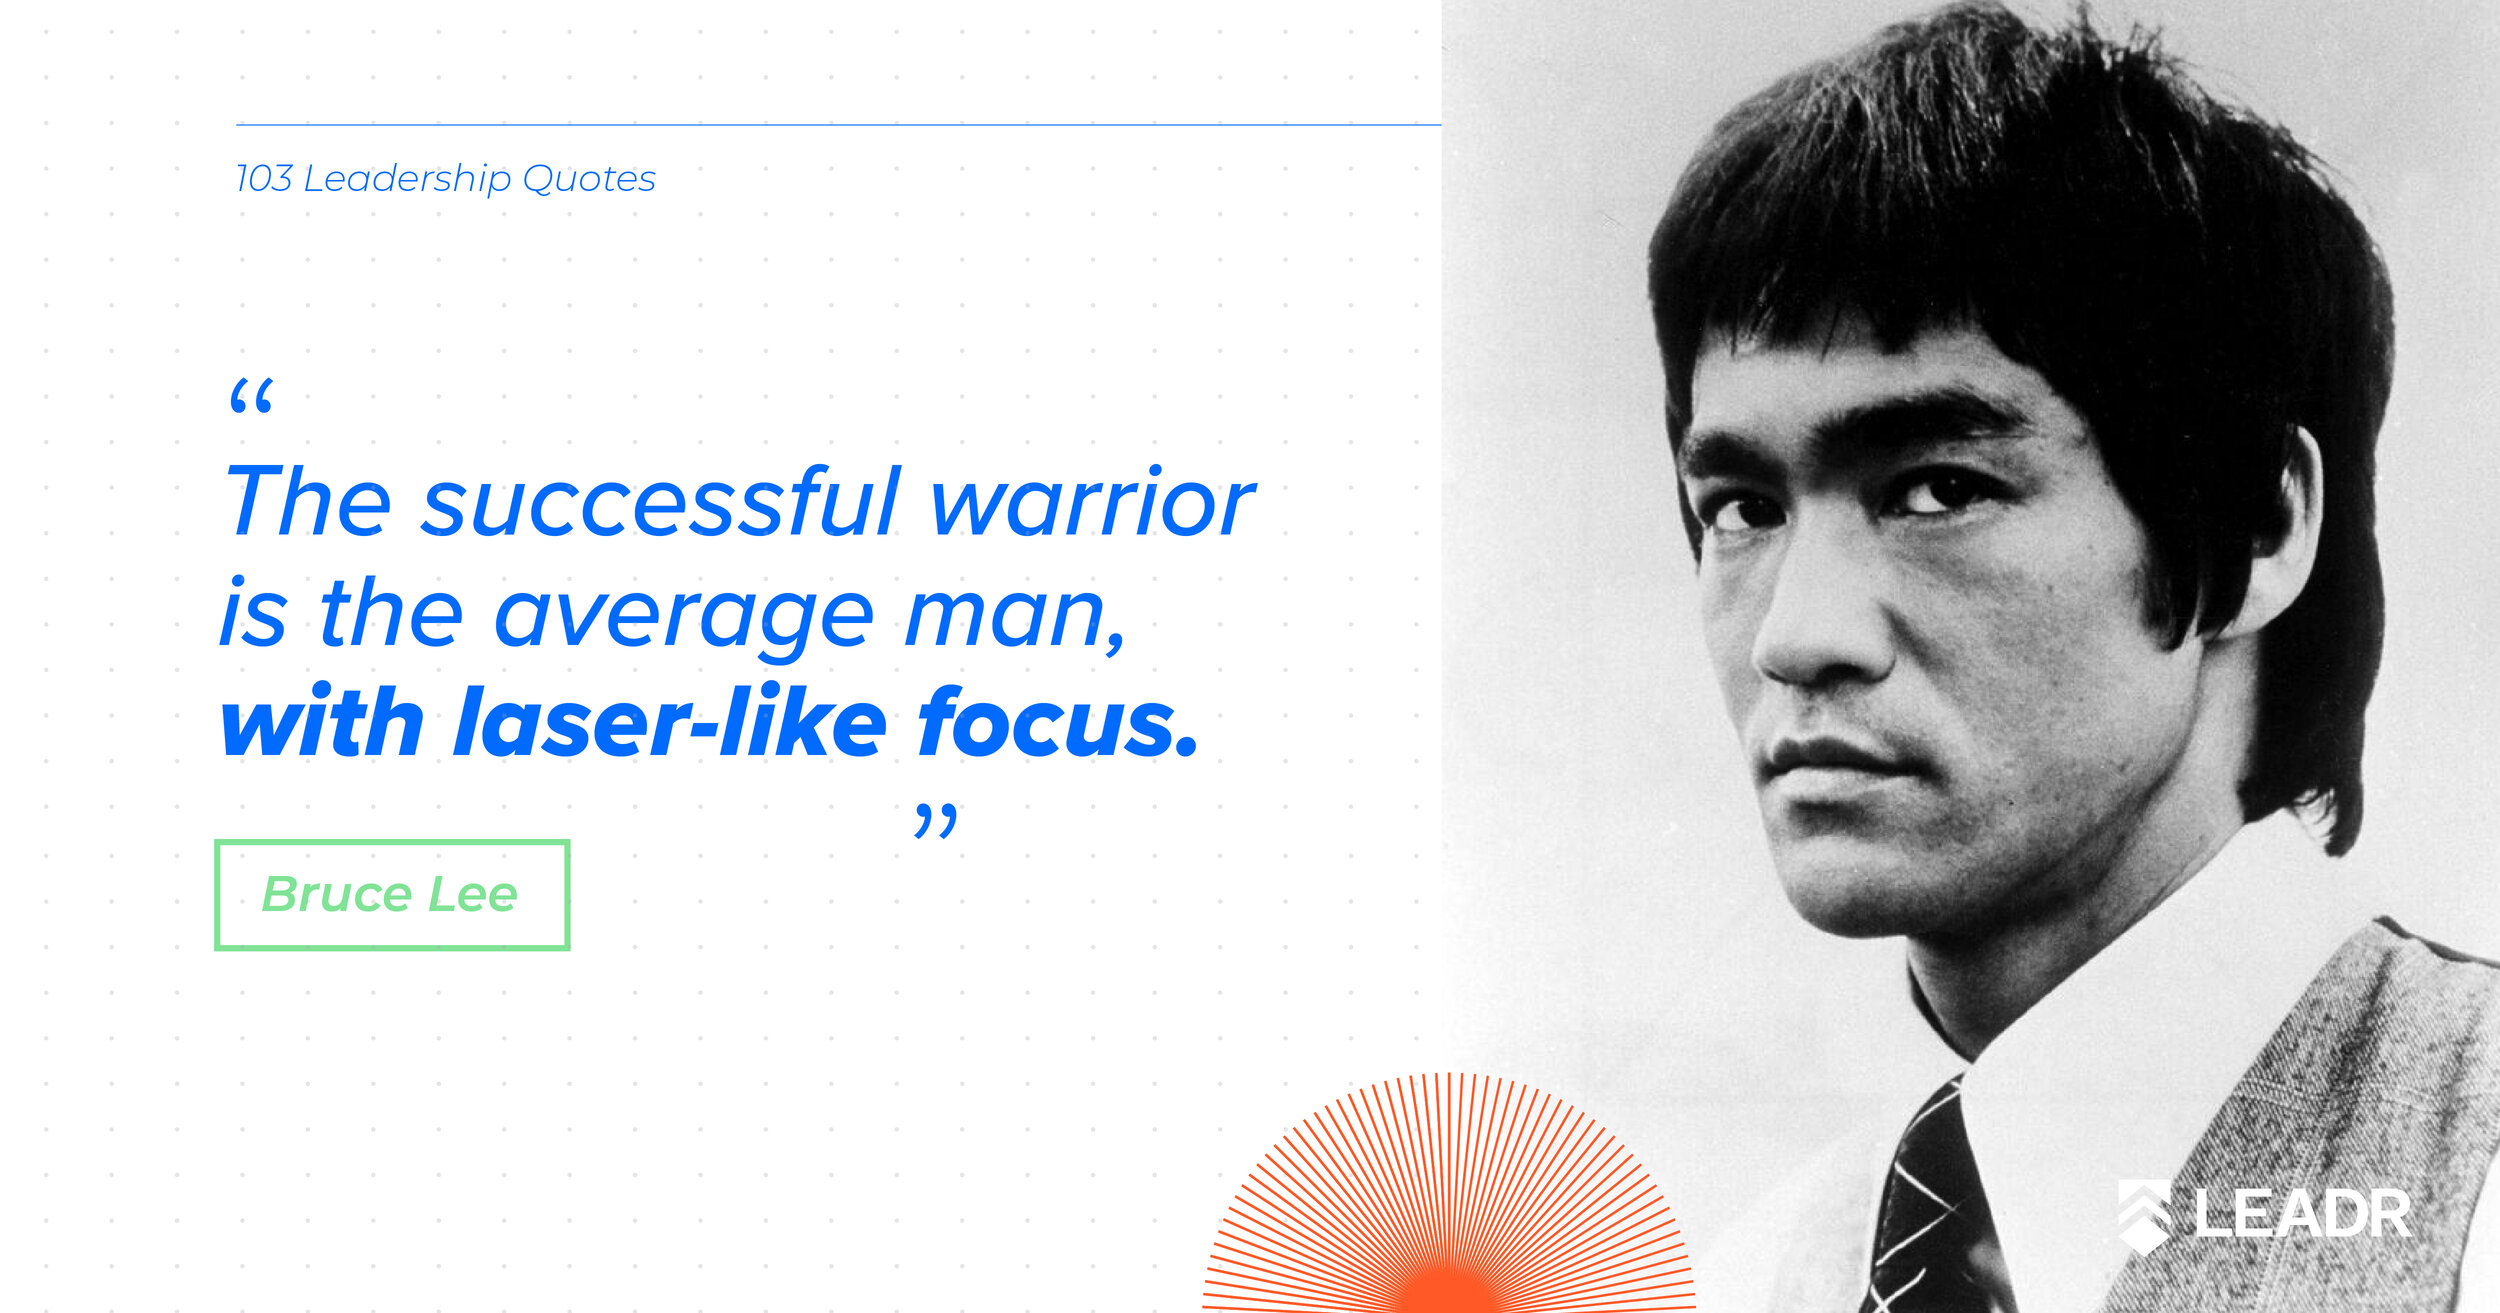 Royalty free downloadable leadership quotes - Bruce Lee